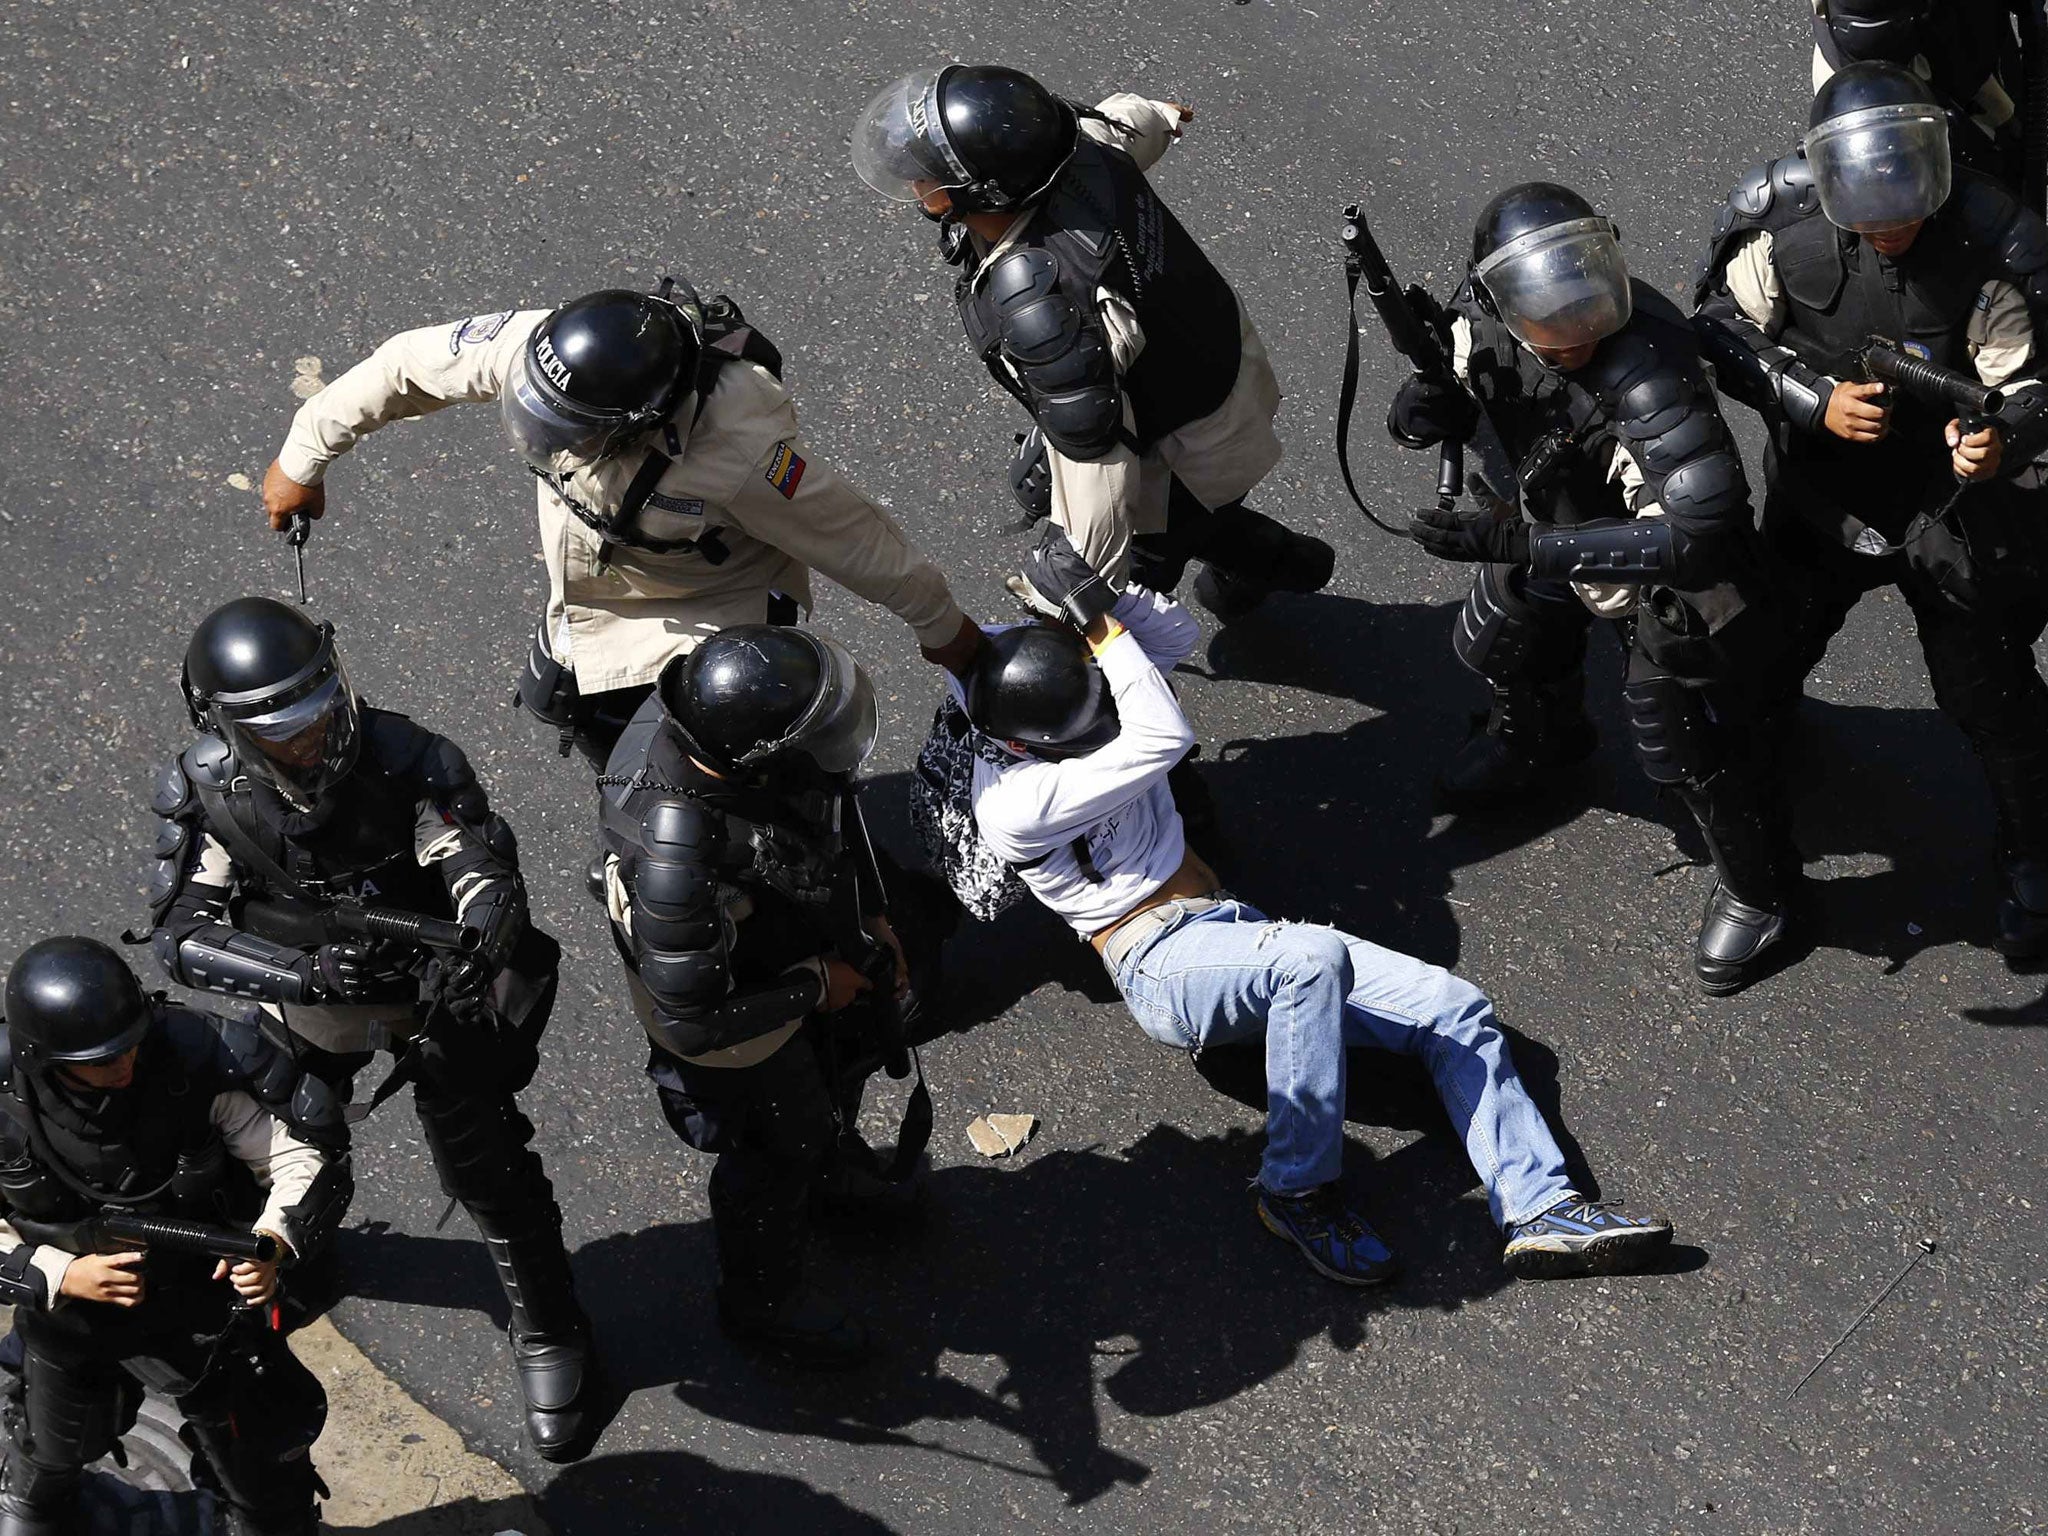 A demonstrator is detained after jumping over a riot police line during an anti-government protest in Caracas